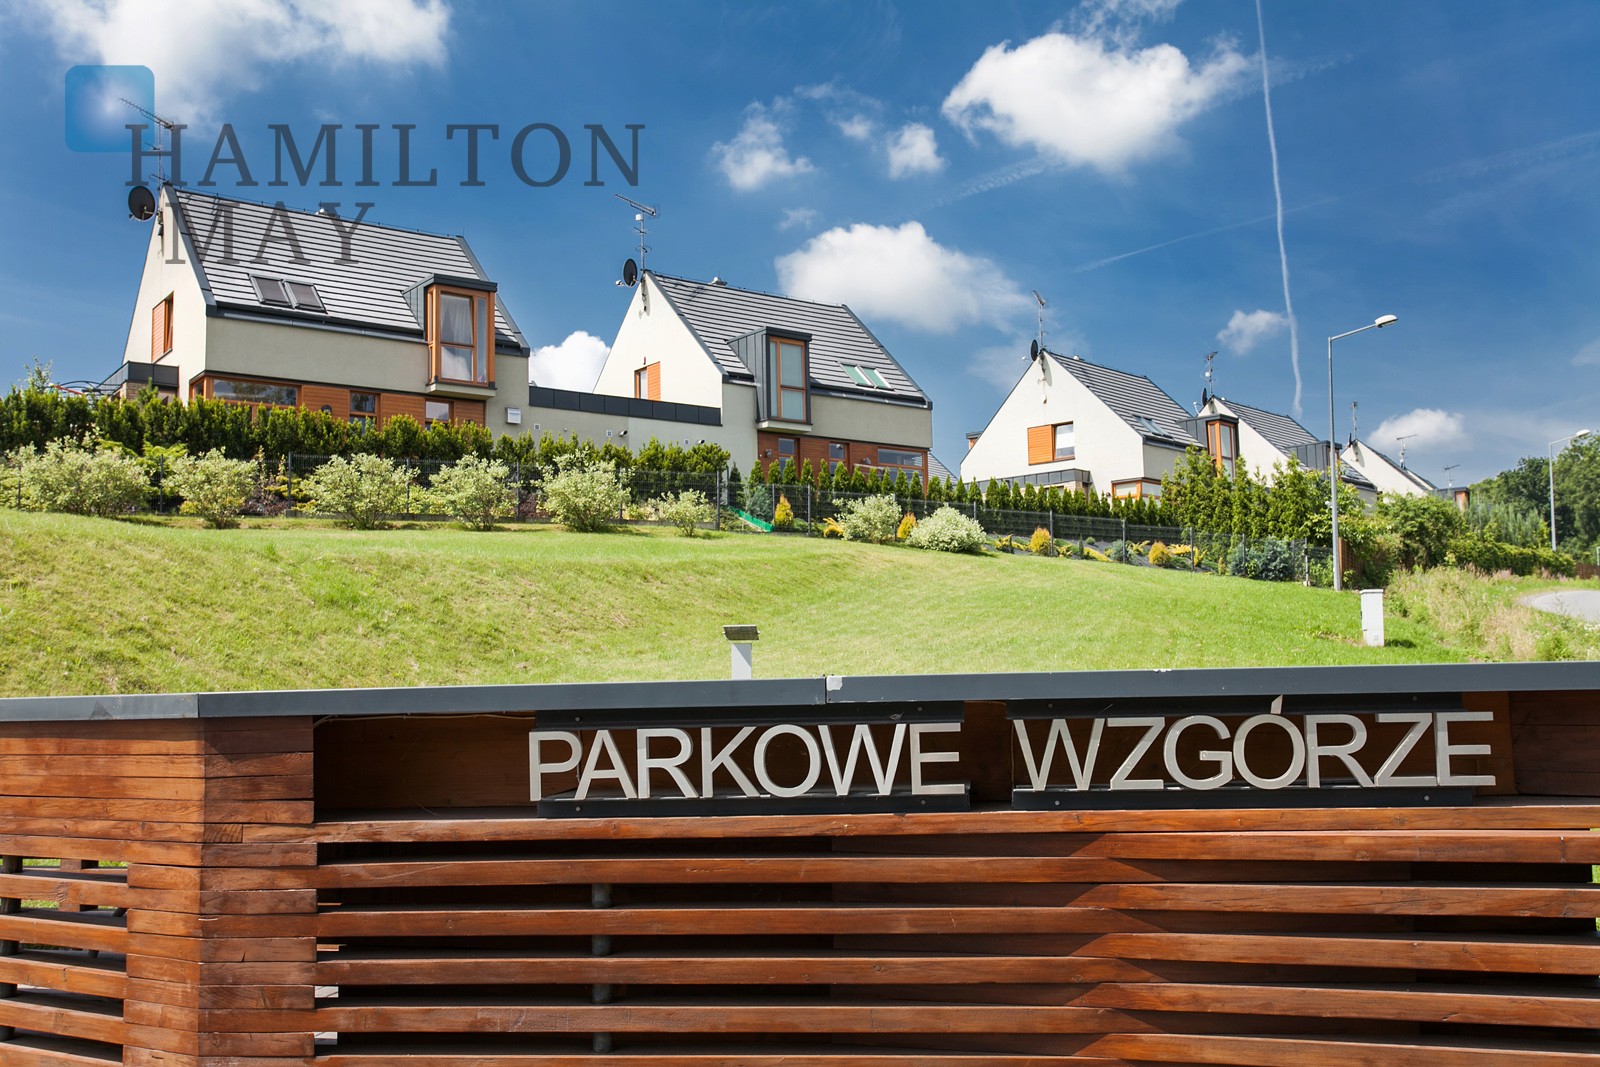 Houses for rent and sale in the Park Hill (Parkowe Wzgórze) development in Krakow